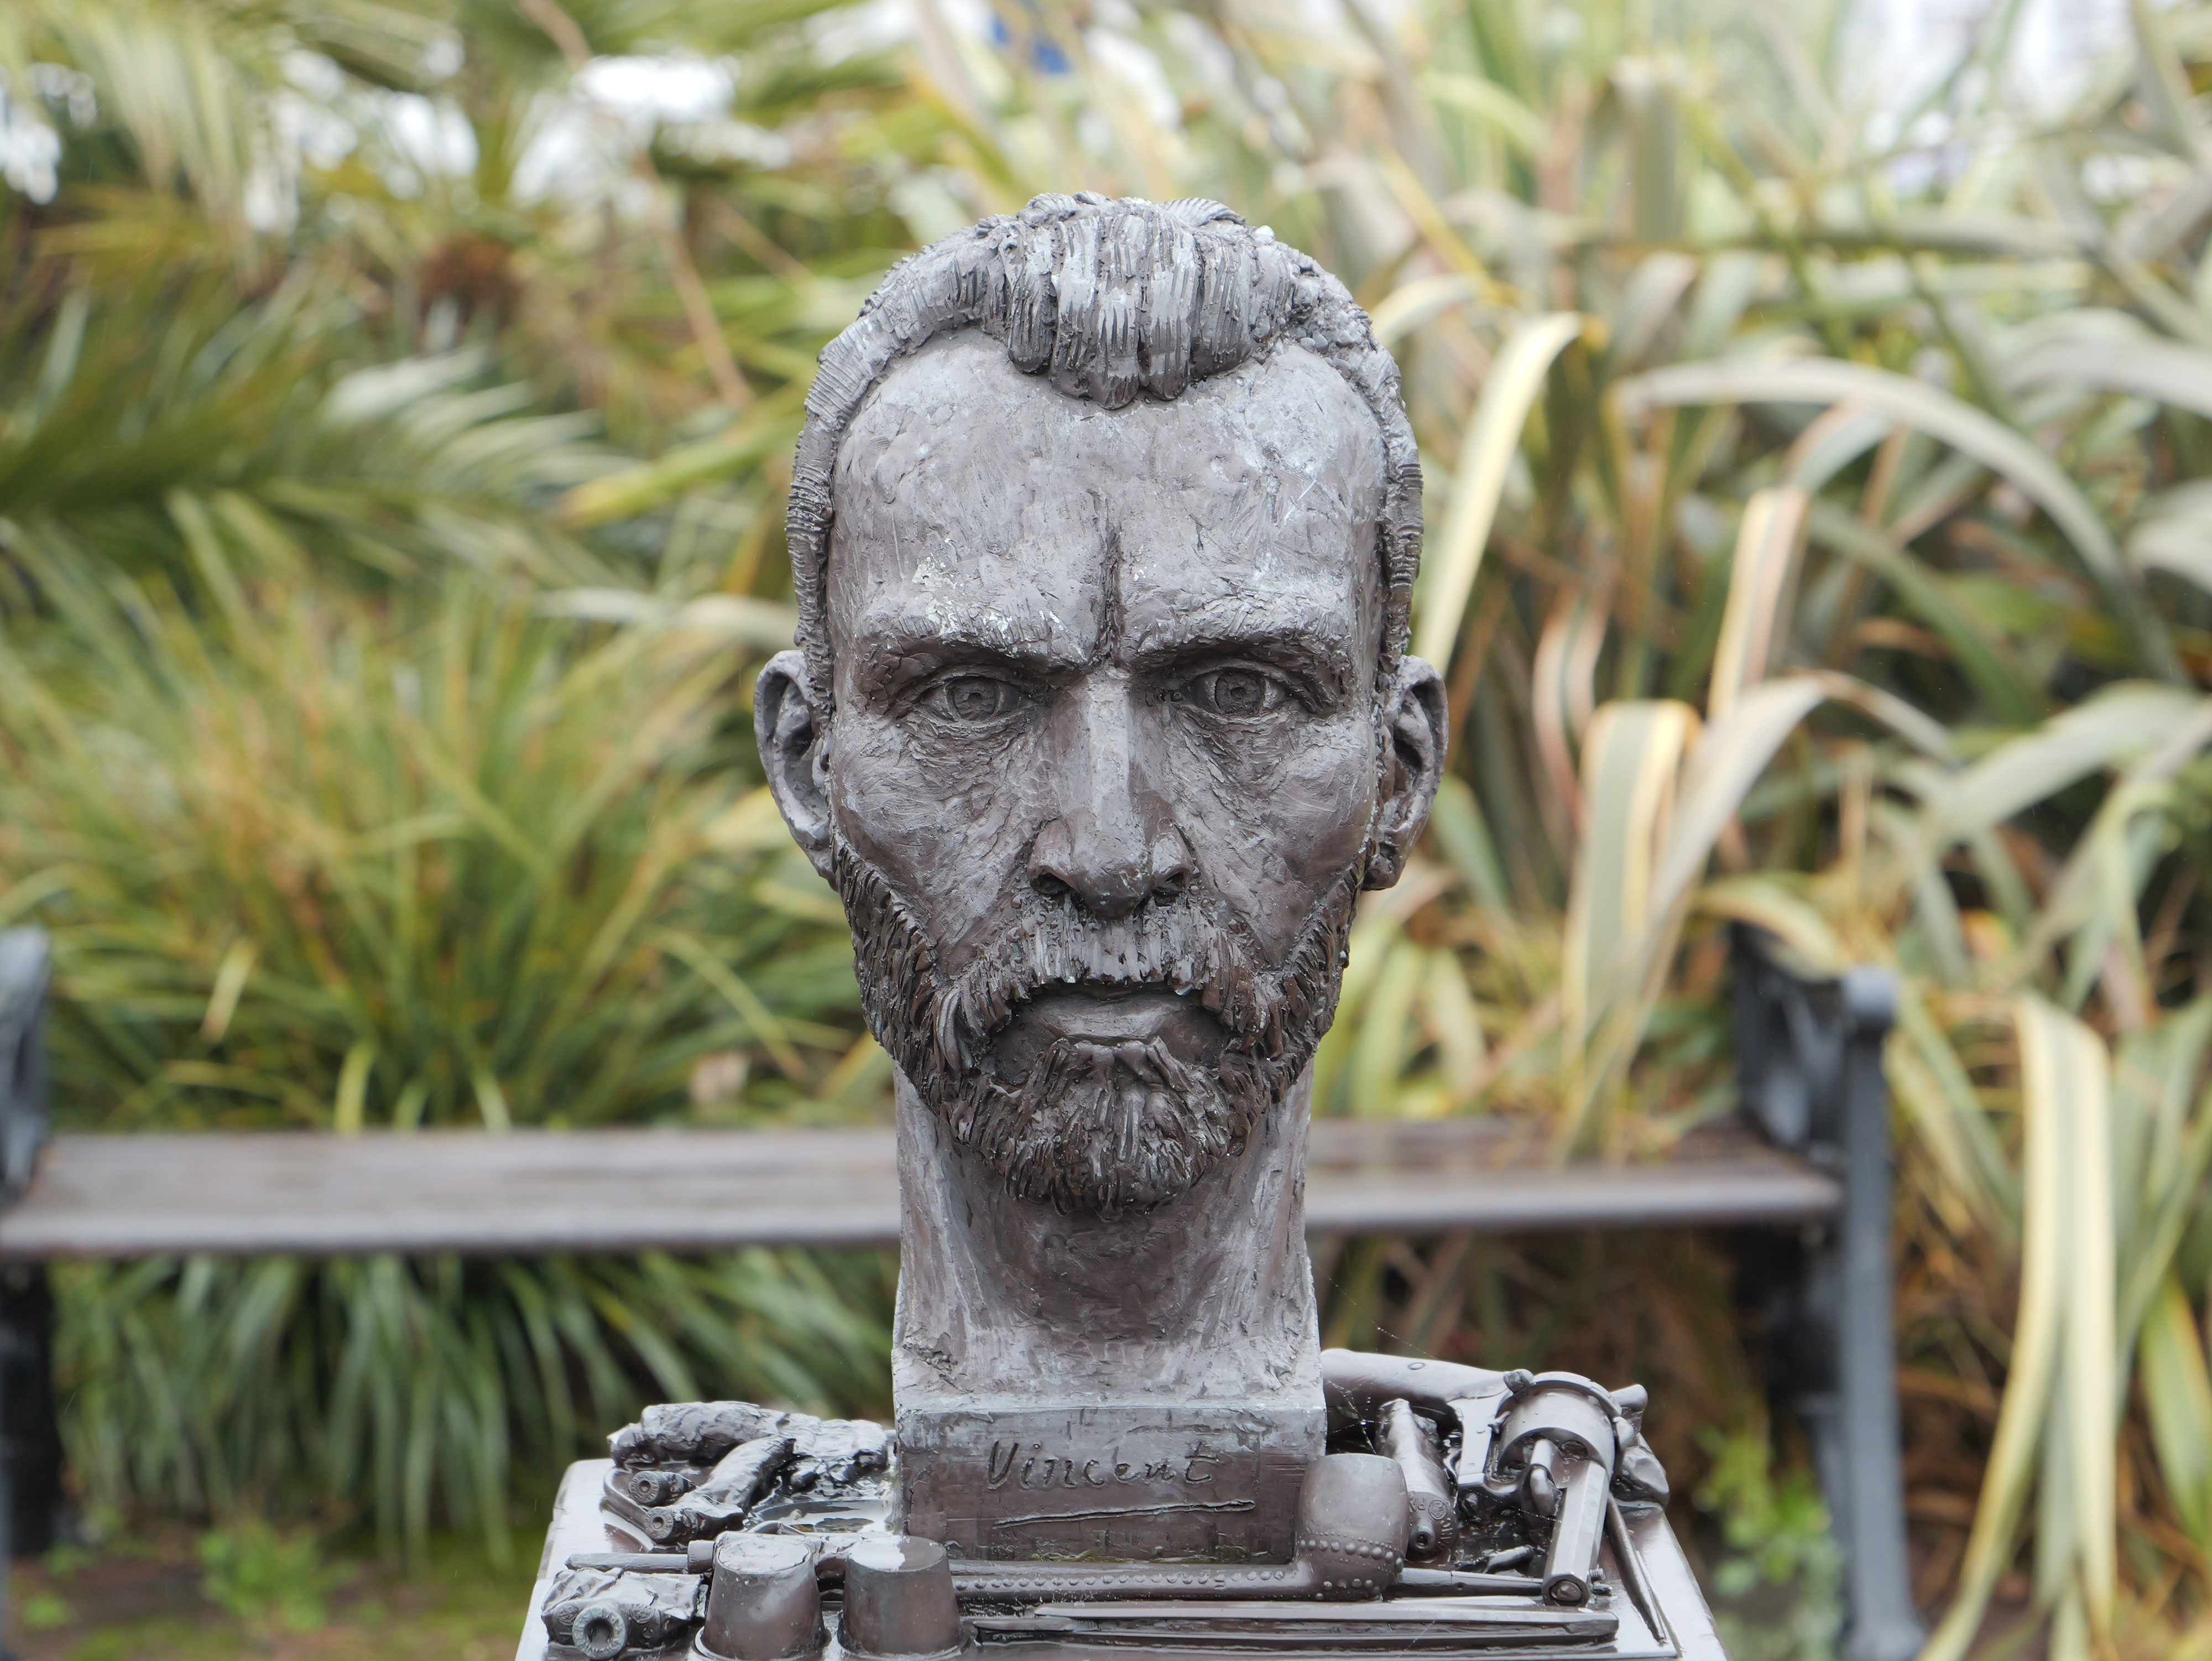 The bust of a man's head